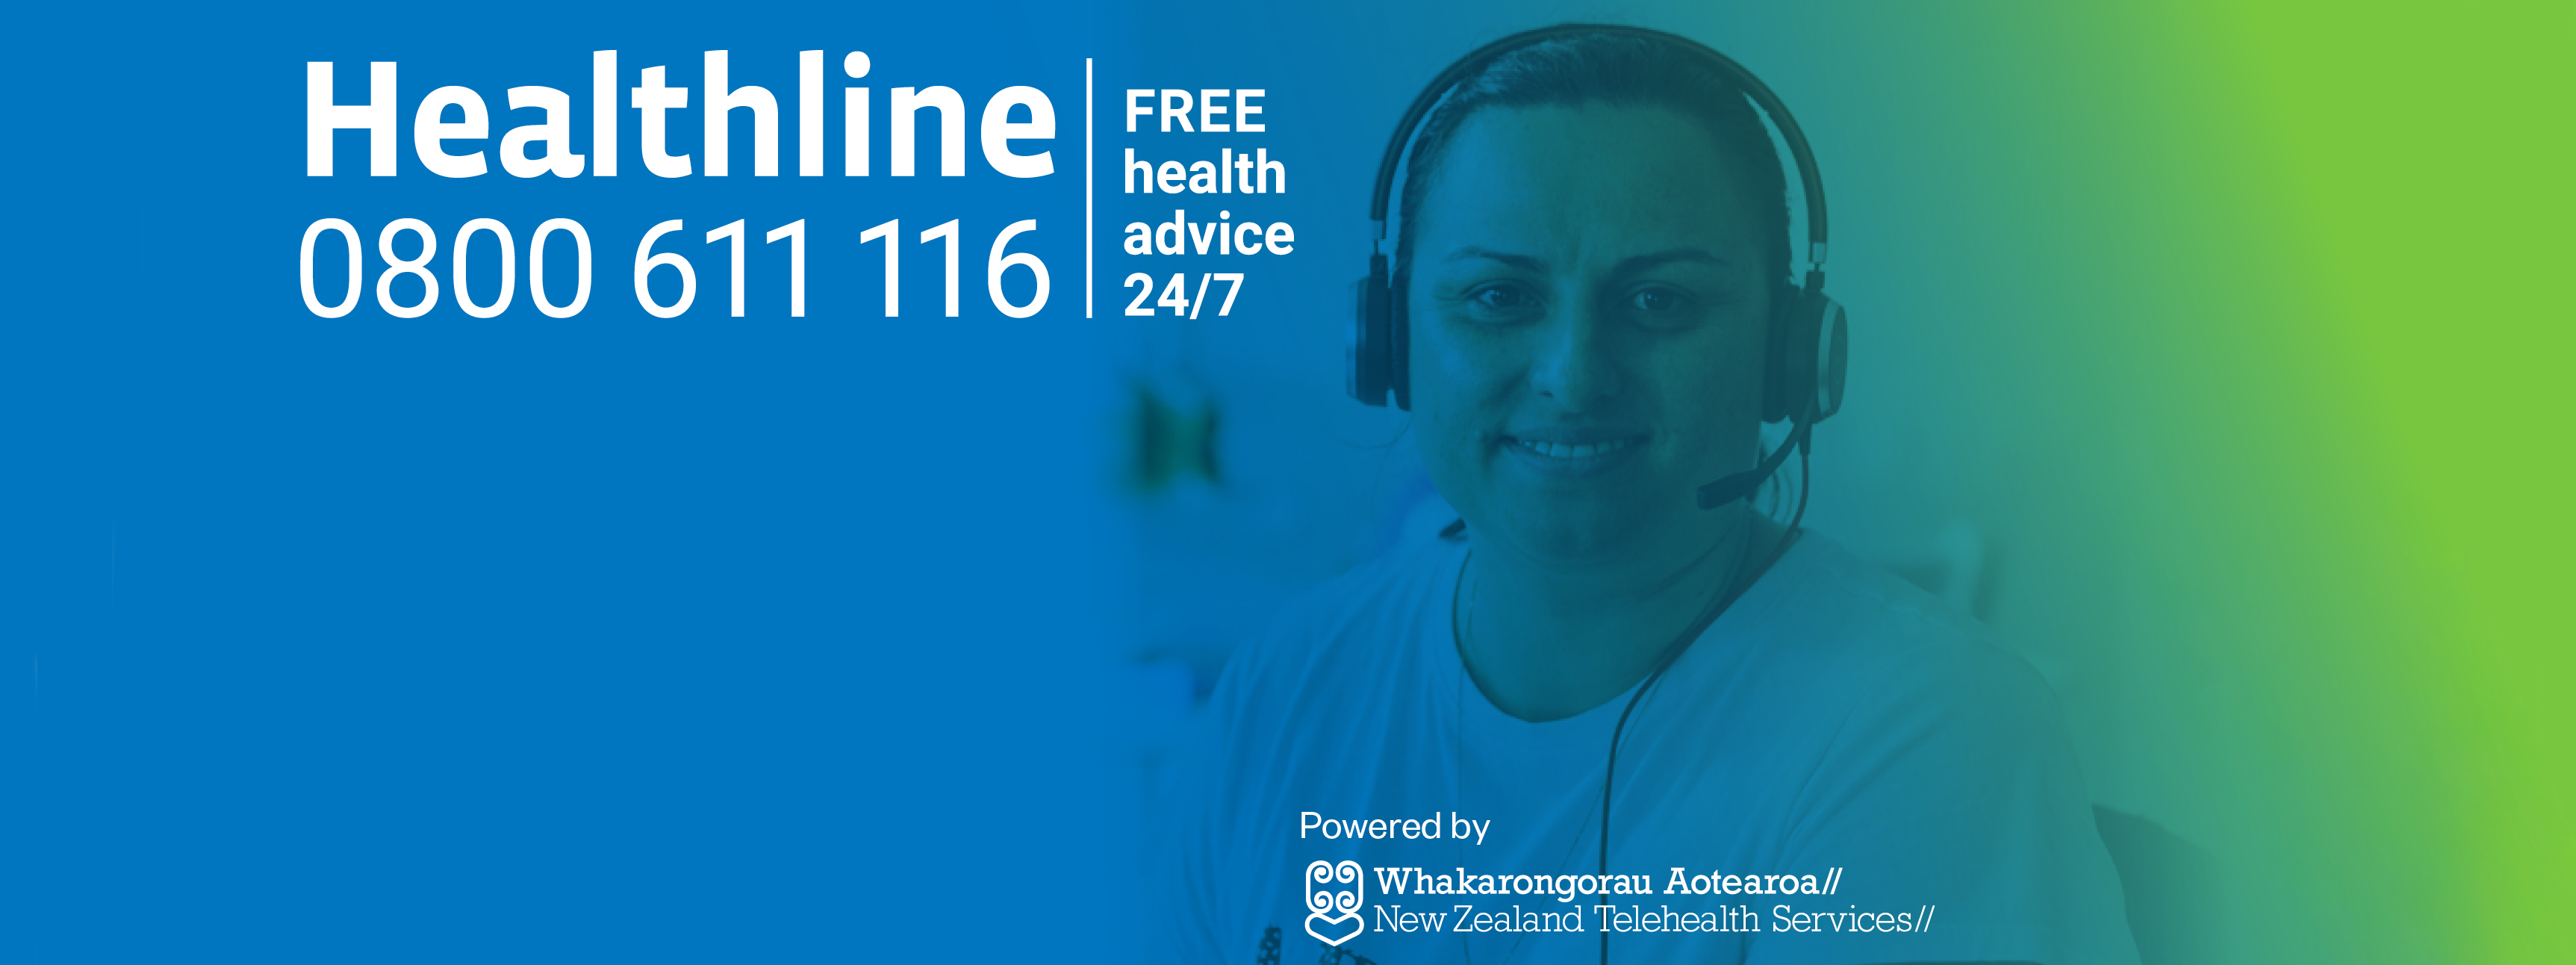 Healthline 0800 611 116 number - Free health advice 24/7. Background image of Helpline operator smiling. Smaller text: Powered by Whakaronorau Aotearoa// New Zealand Telehealth services// 